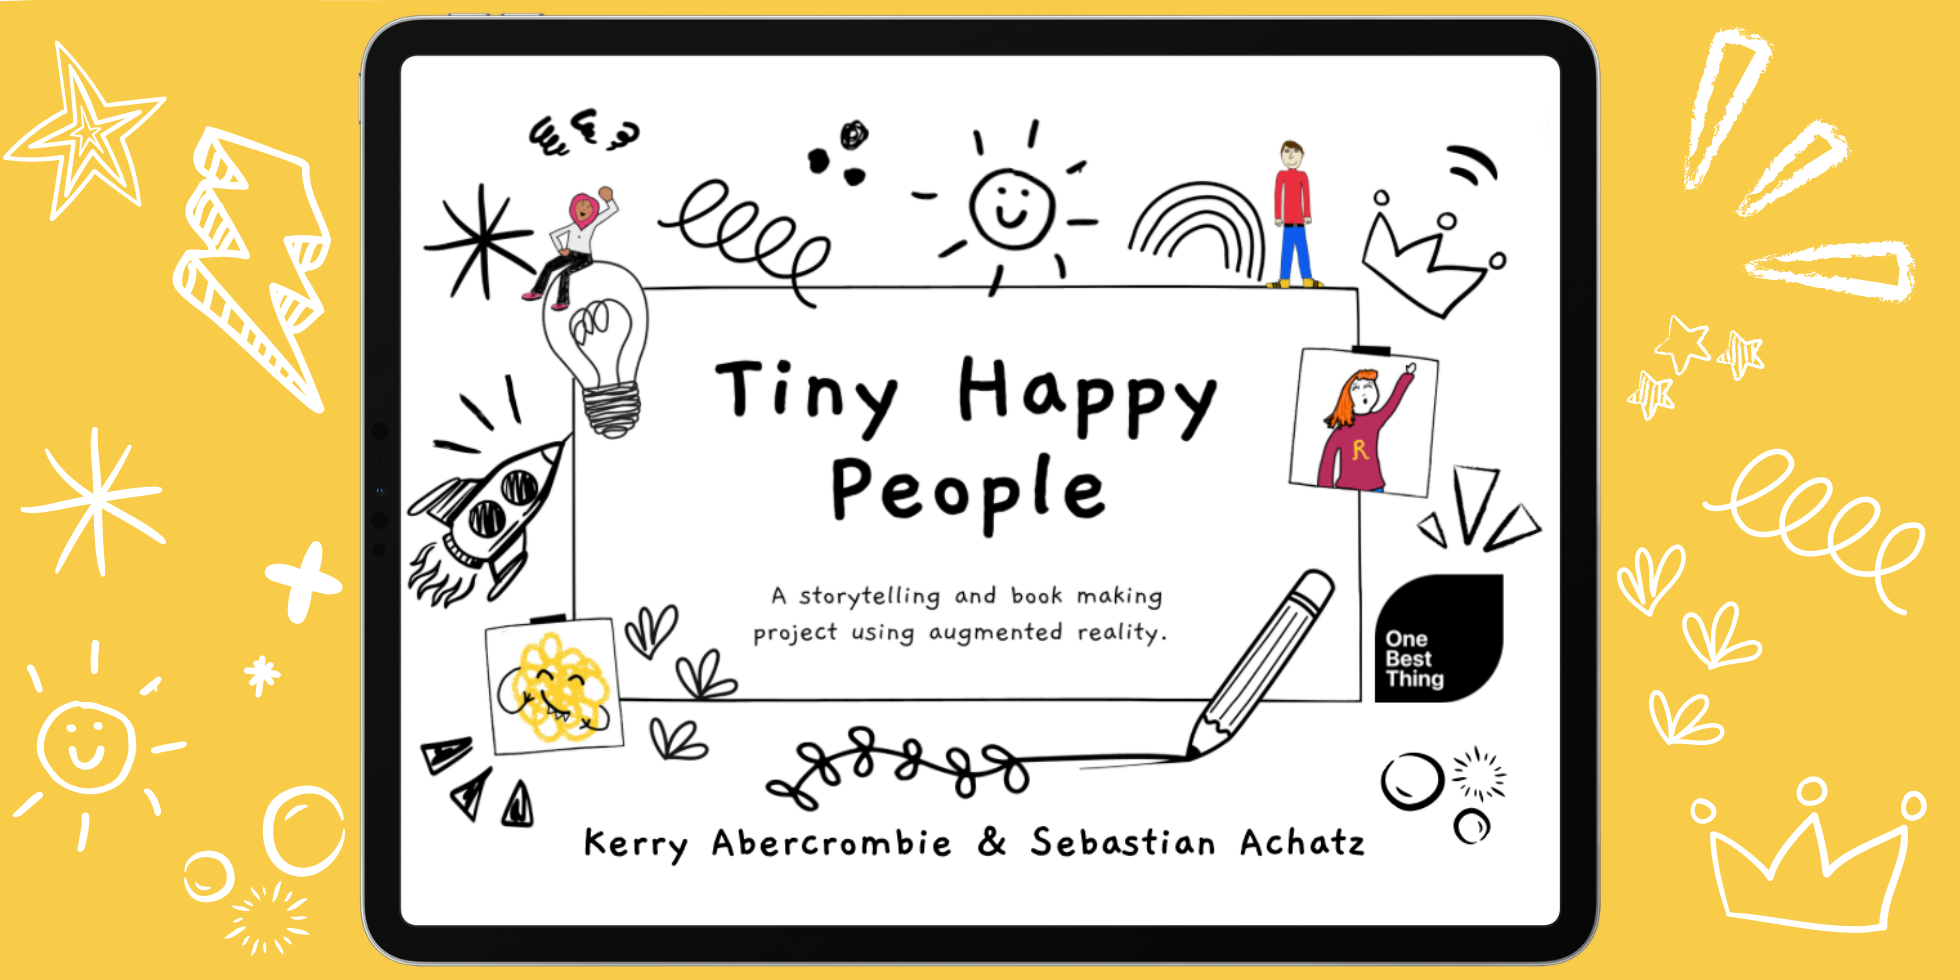 Font cover of the Tiny Happy People eBook with a yellow background with lots of doodles.